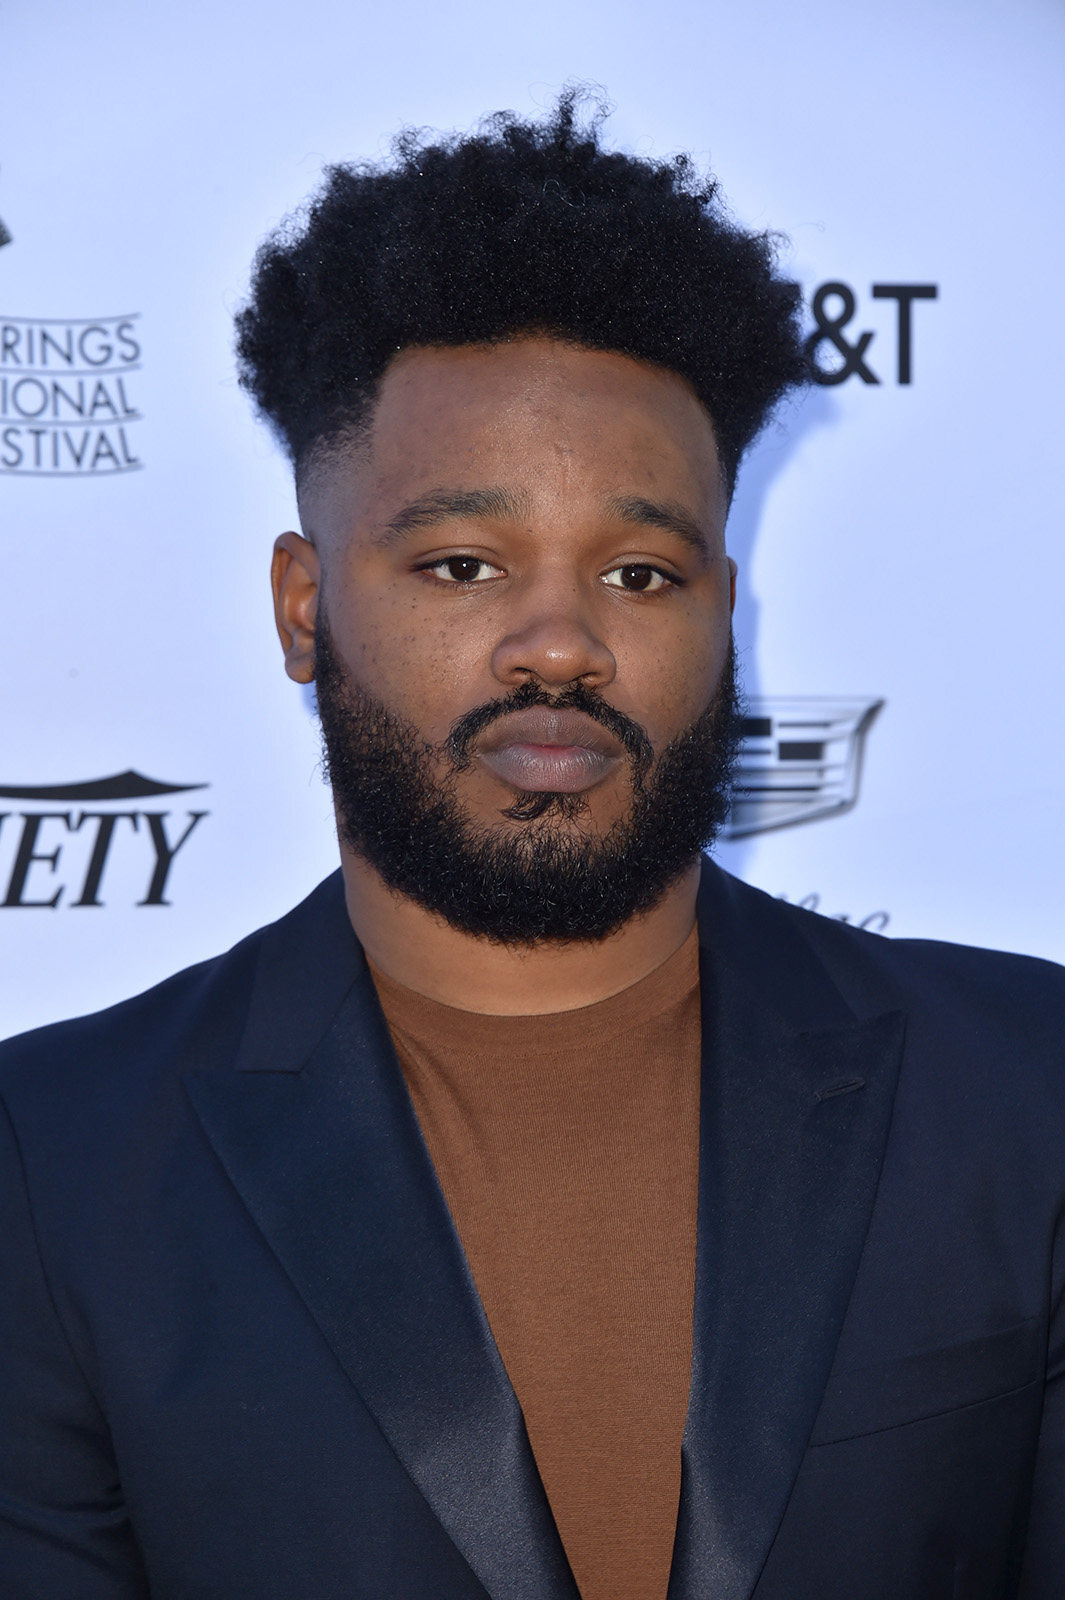 Director Ryan Coogler attends Variety’s Creative Impact Awards and 10 Directors to Watch Brunch during the 30th annual Palm Springs International Film Festival in California in January 2019. Photo: TNS